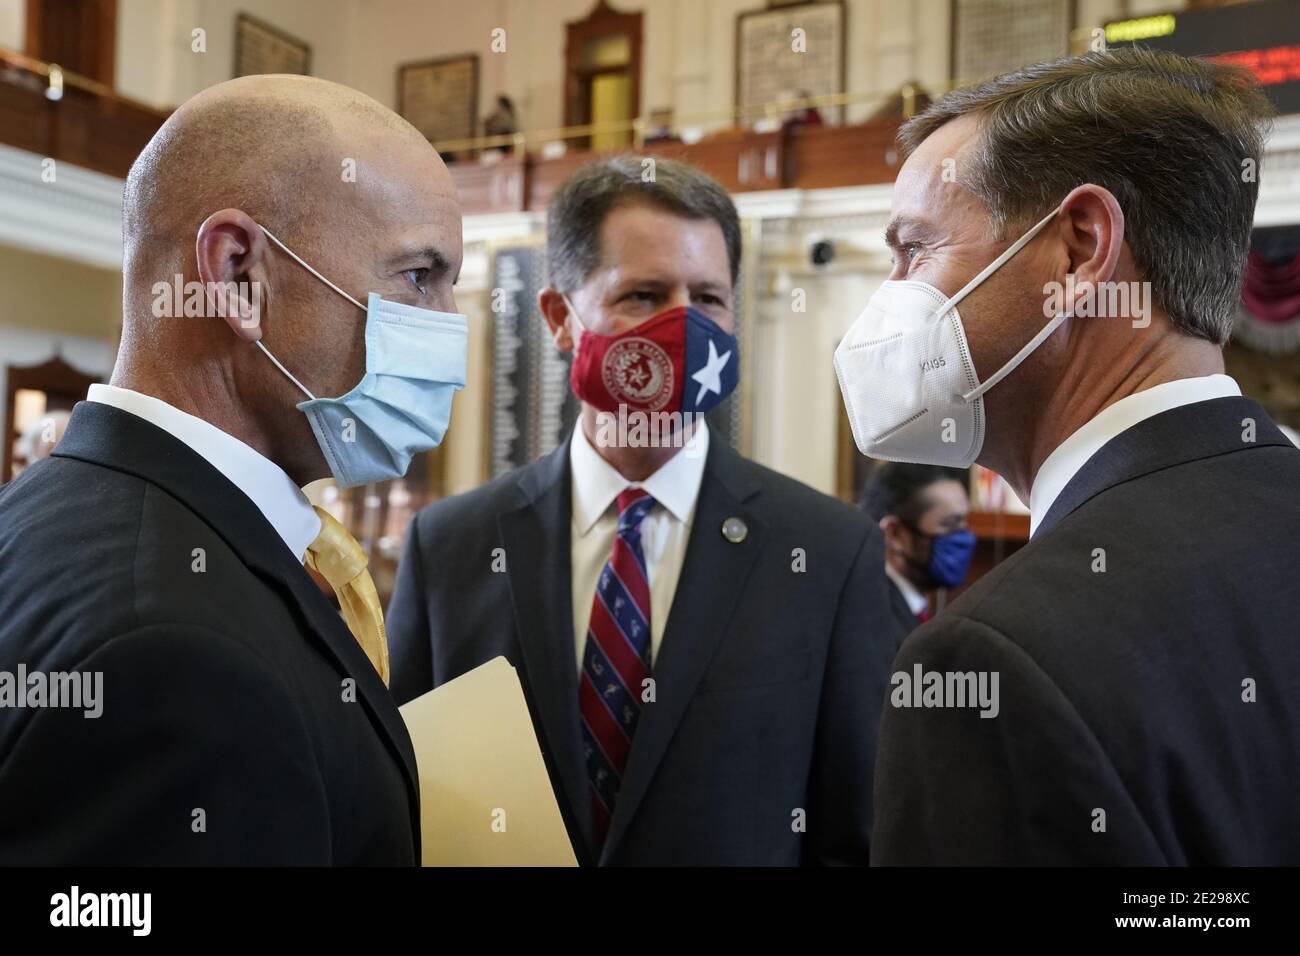 Austin, Texas January 12, 2021: State Rep. Matt Shaheen , R-Plano,  Rep. Scott Sanford, R-McKinney, and Rep. Trent Ashby, R-Lufkin greet each other on the floor prior to the opening of the 87th Session of the Texas Legislature. Credit: Bob Daemmrich/Alamy Live News Stock Photo